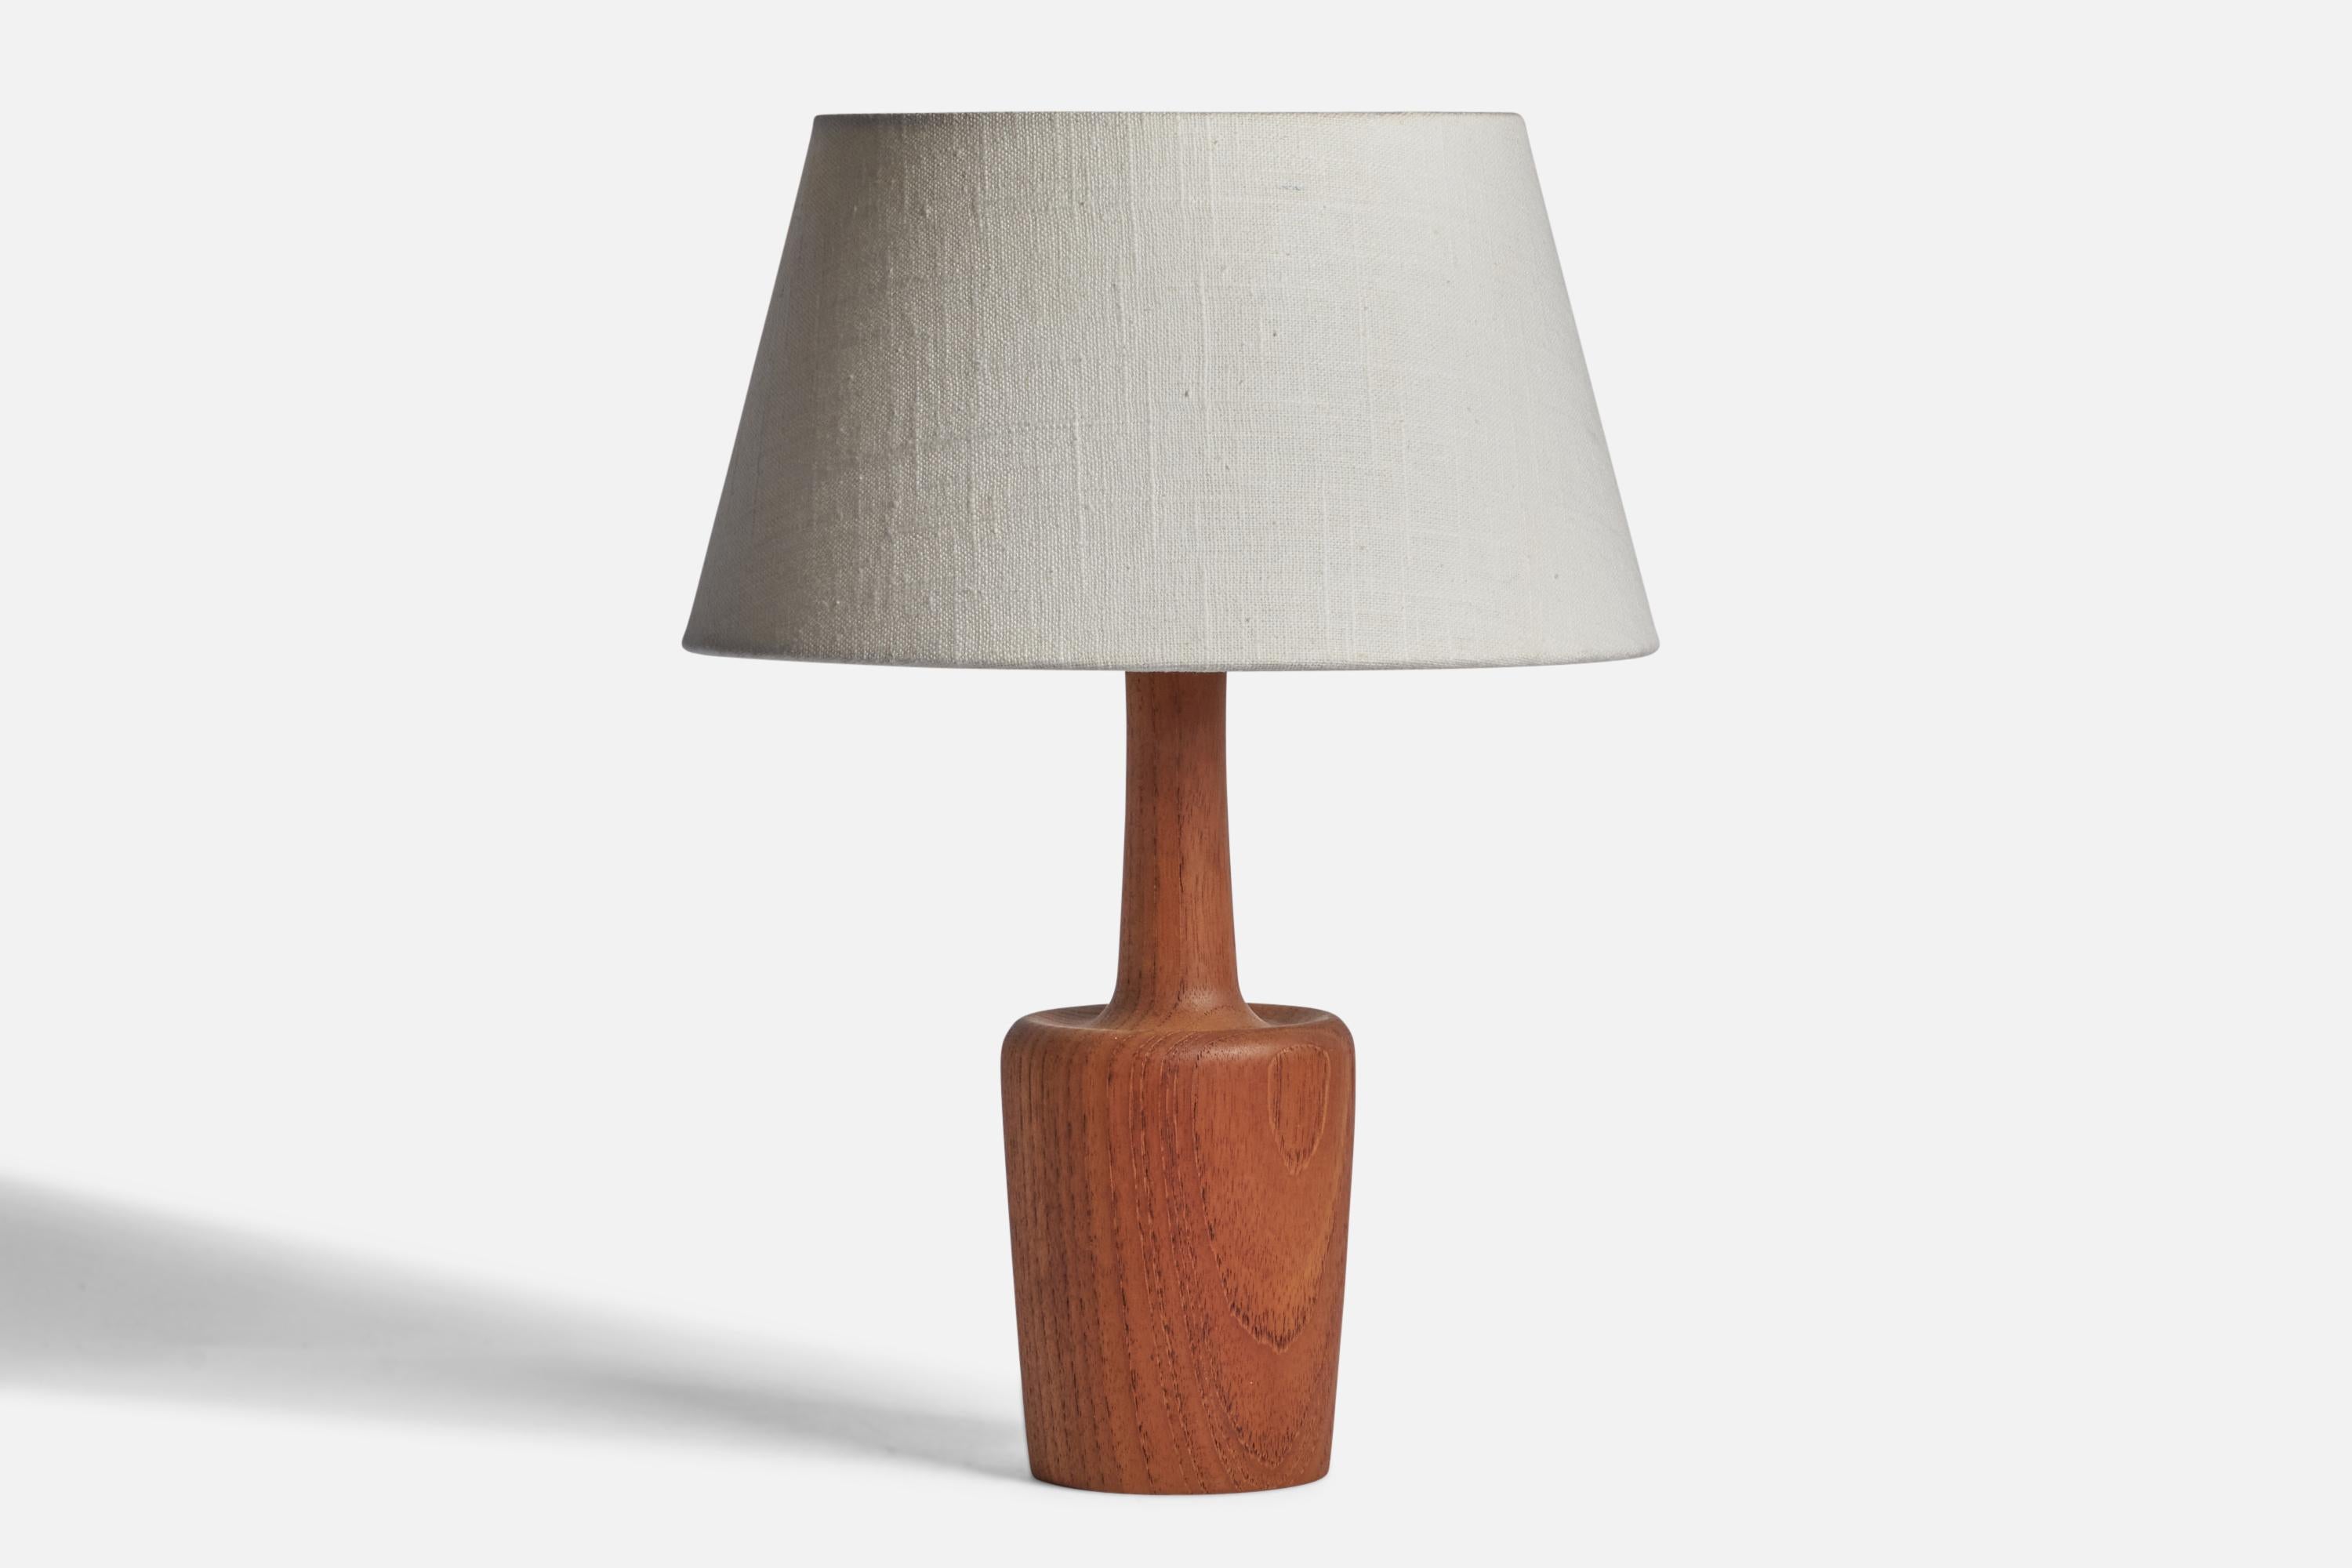 A teak table lamp designed and produced in Sweden, 1950s.

Dimensions of Lamp (inches): 11.25